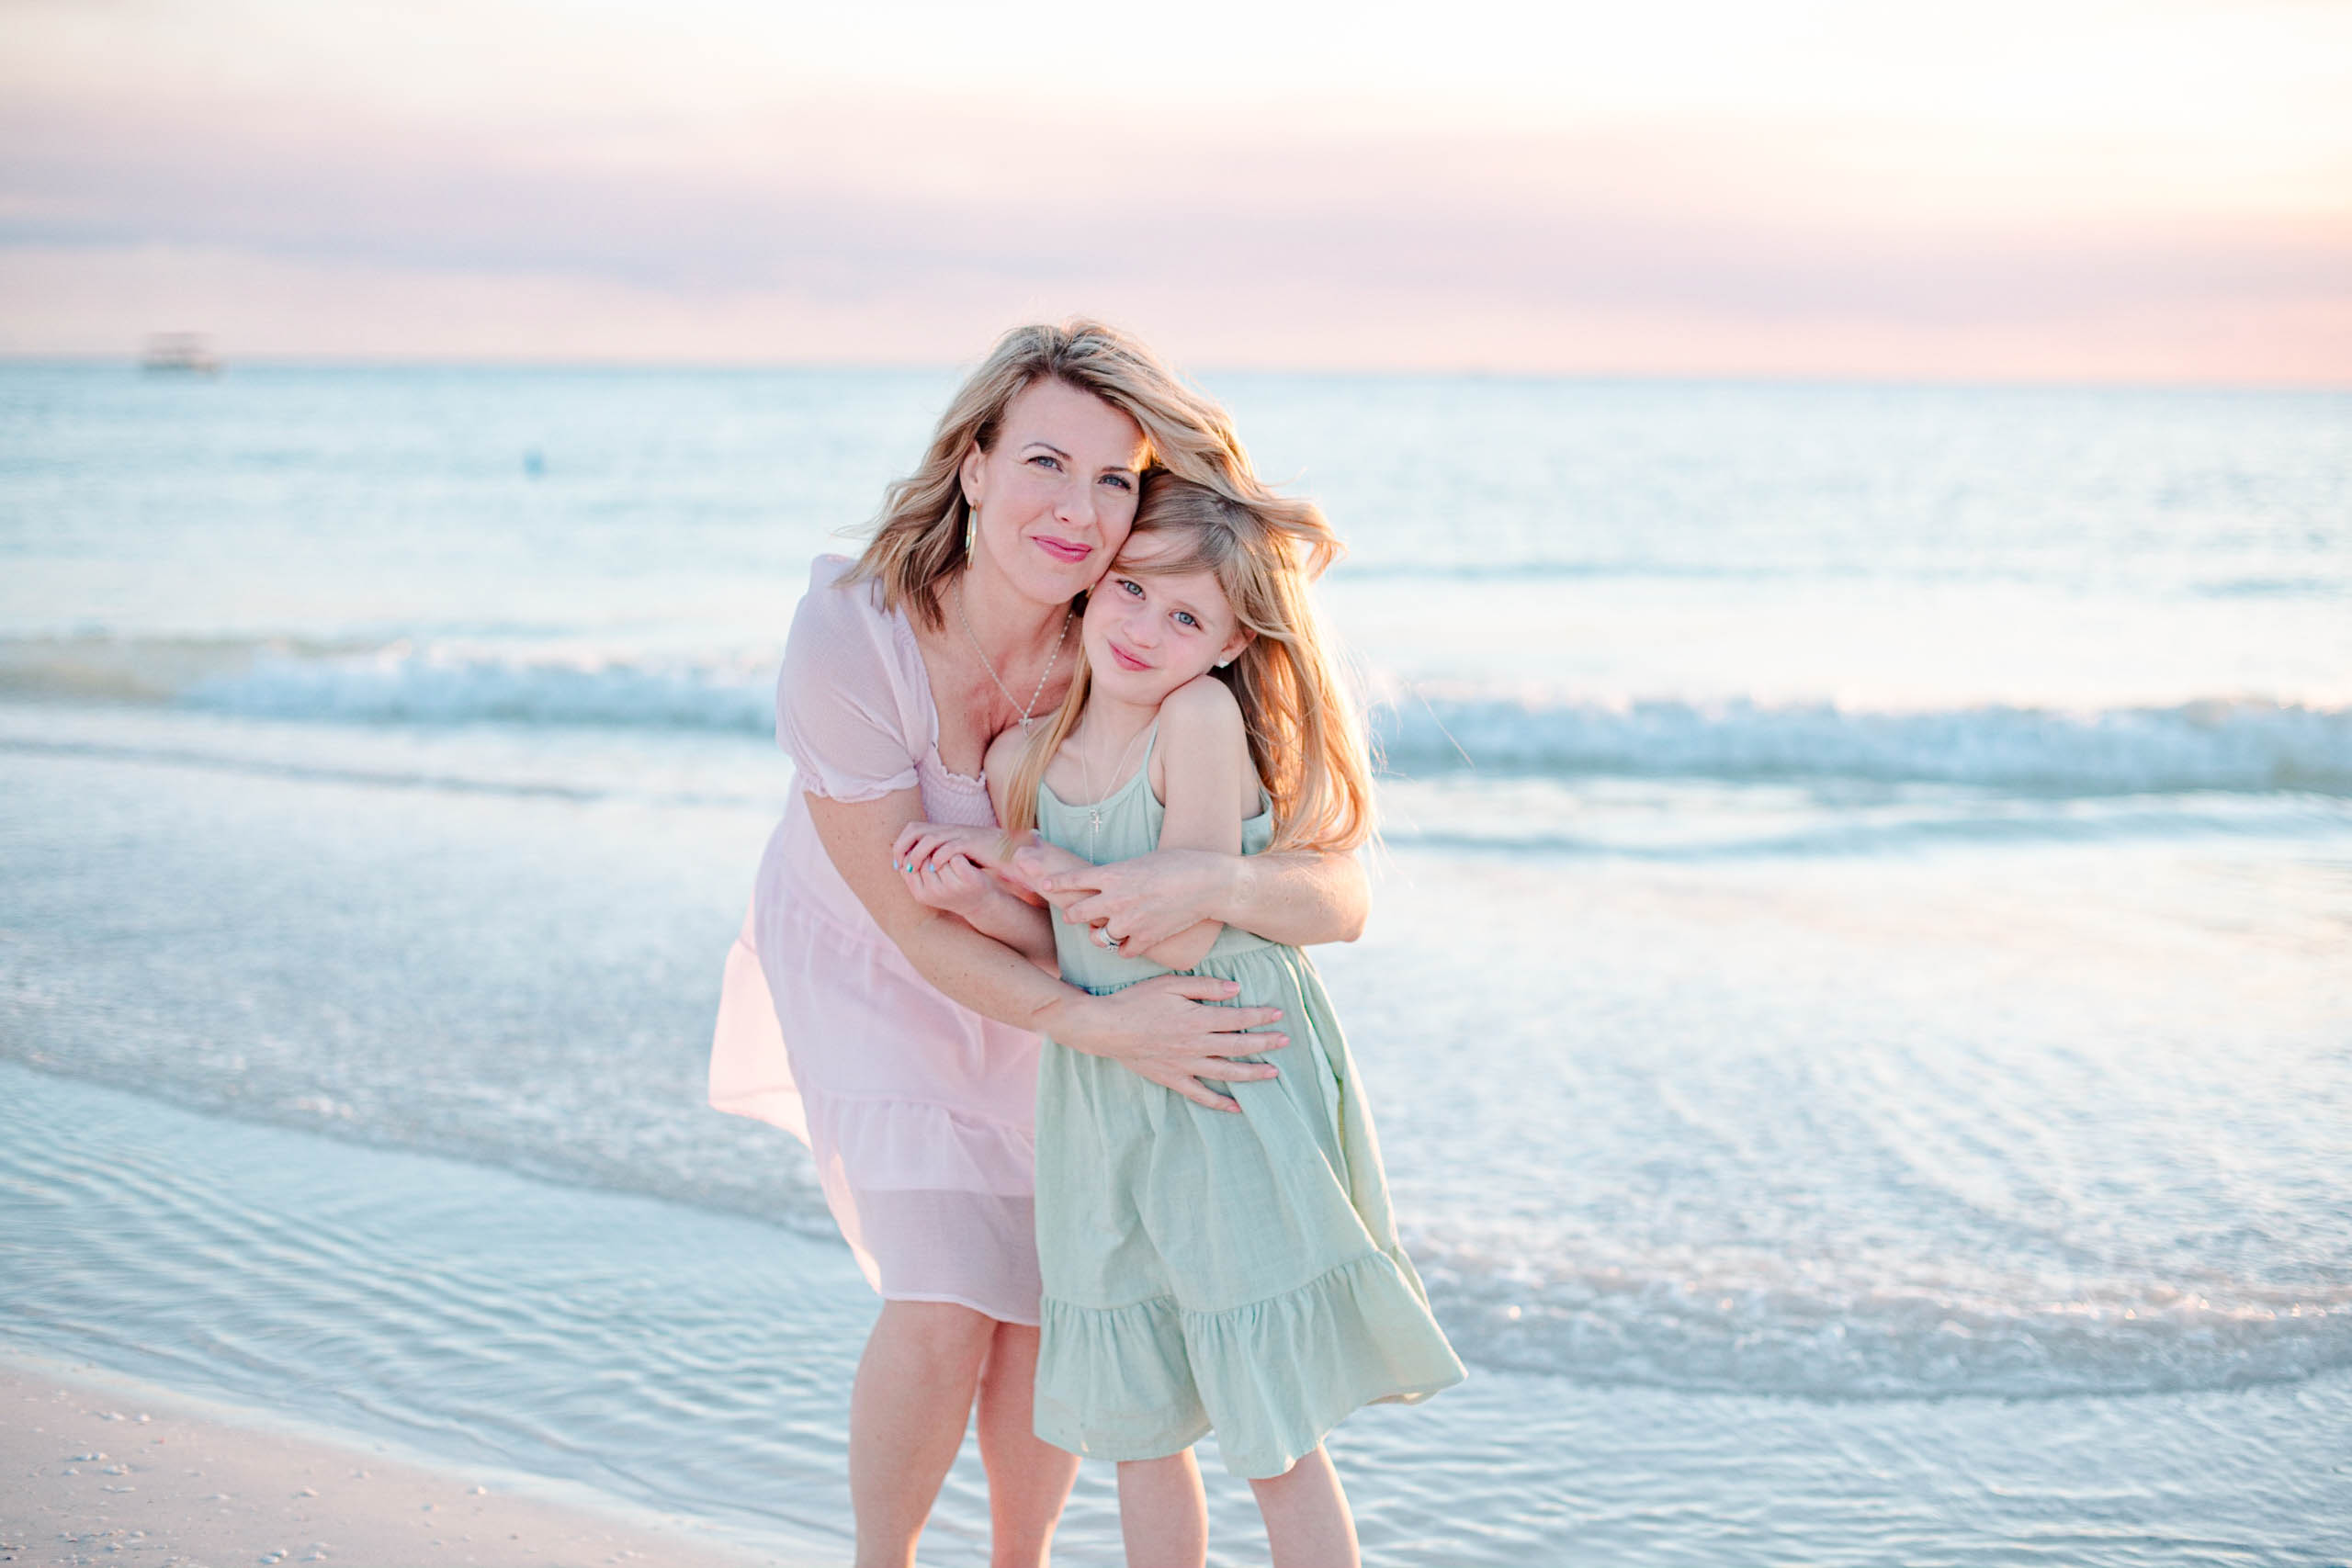 Mother and daughter in beachy dresses enjoying Marco Island Beach, Florida during spring break